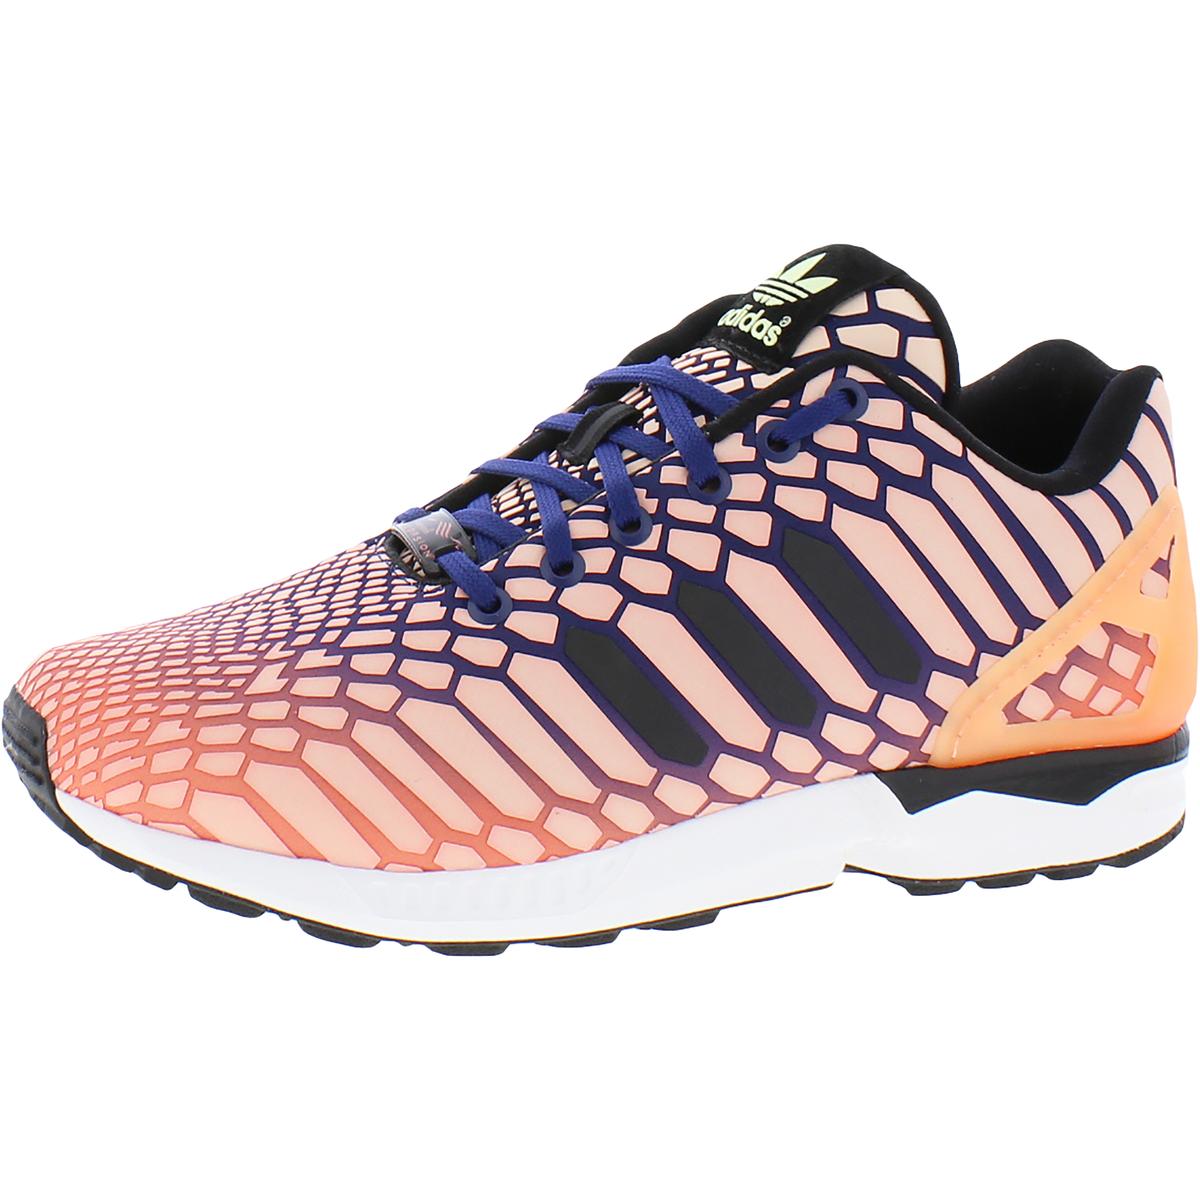 Zx Flux Womens Lace-Up Fitness Fashion Sneakers